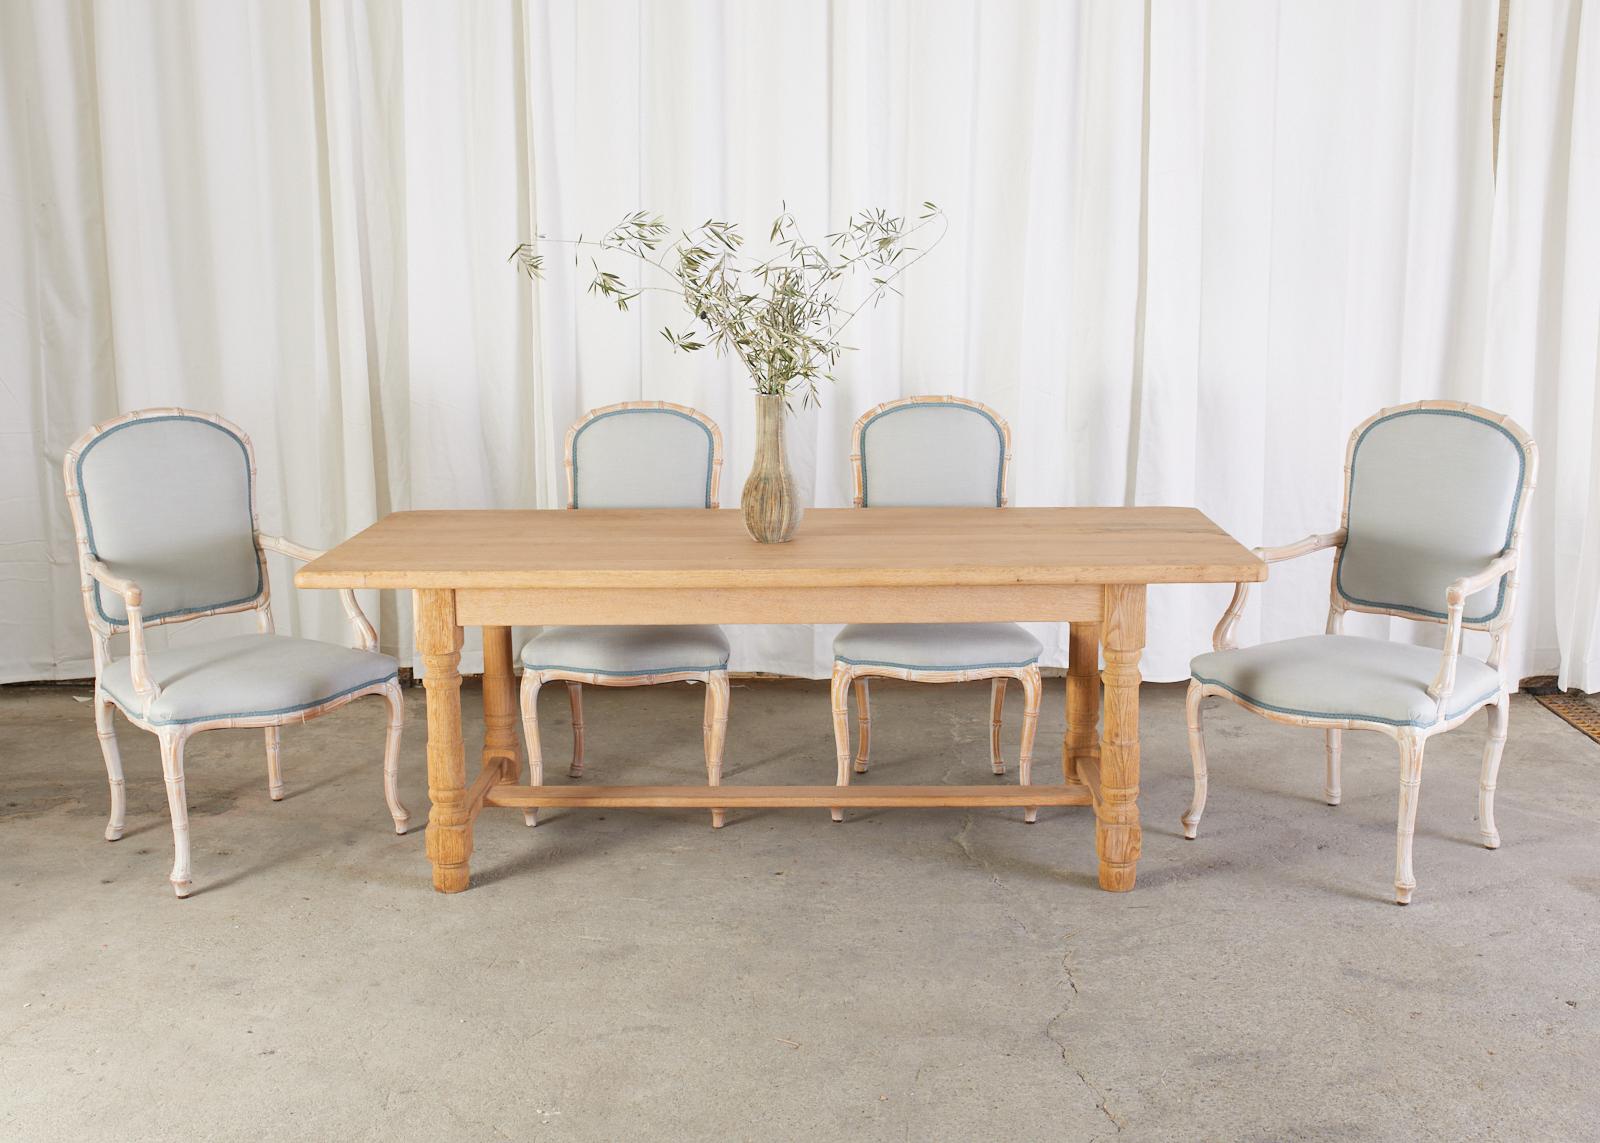 Rustic Country French farmhouse dining table or harvest table featuring a bleached oak distressed finish with an aged patina. Constructed with a 1.5 inch thick plank top of solid oak. Ample legroom measuring 24.5 inches from the floor to the apron.